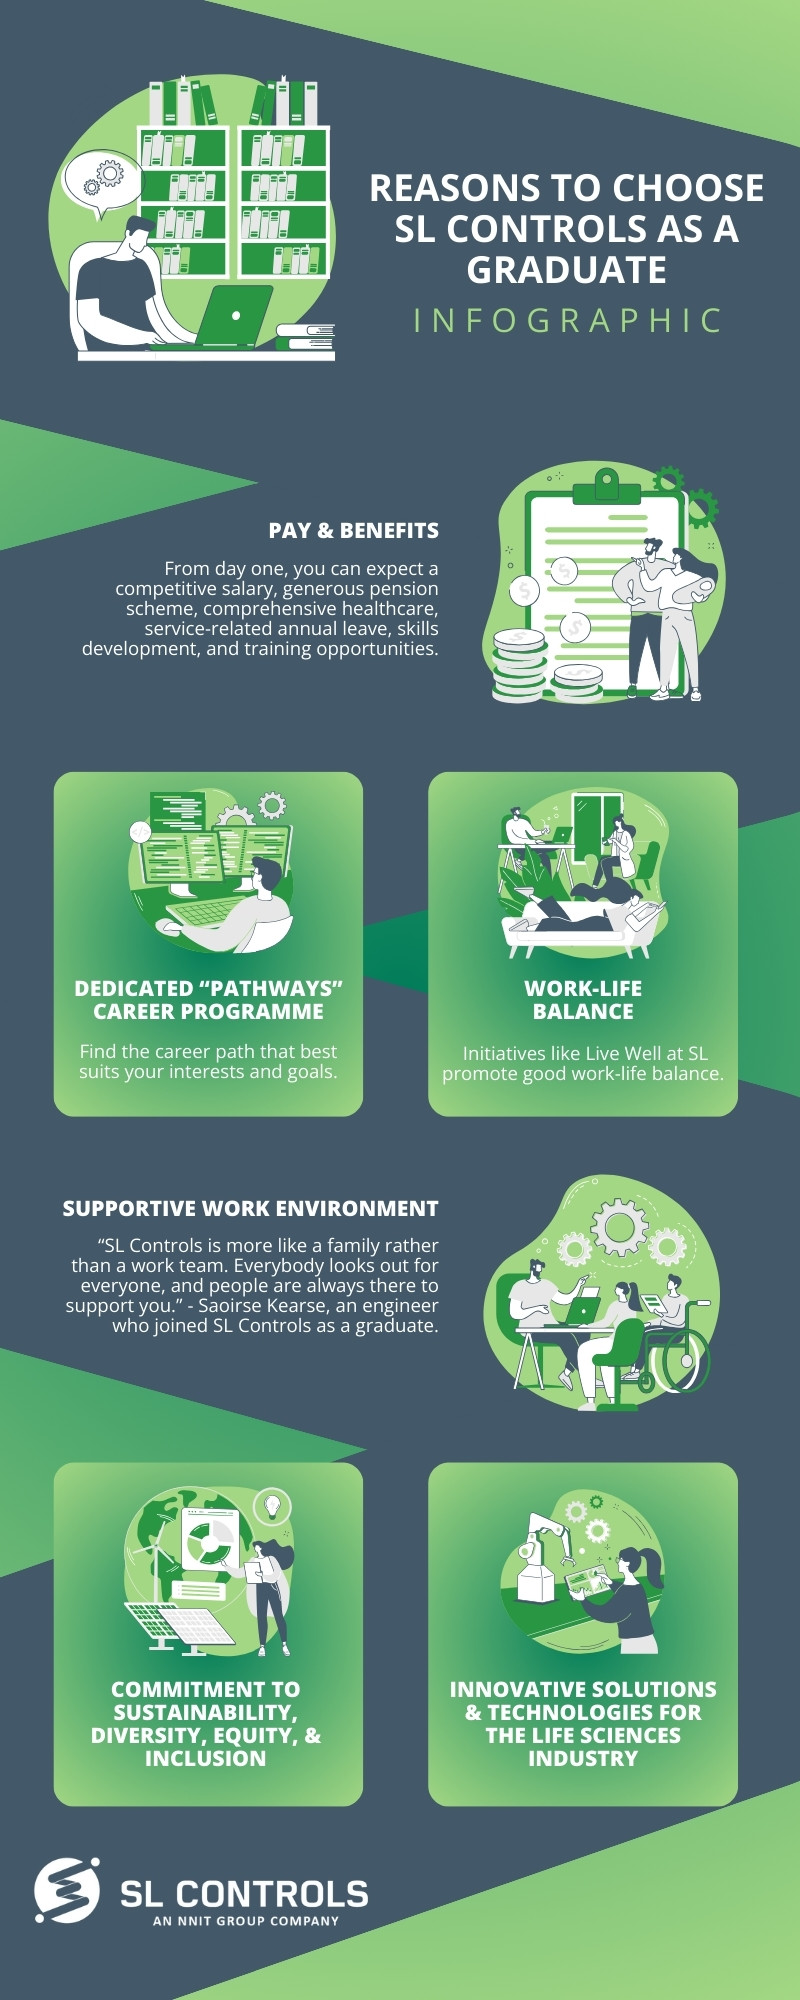 Reasons to Choose SL Controls As a Graduate - Infographic